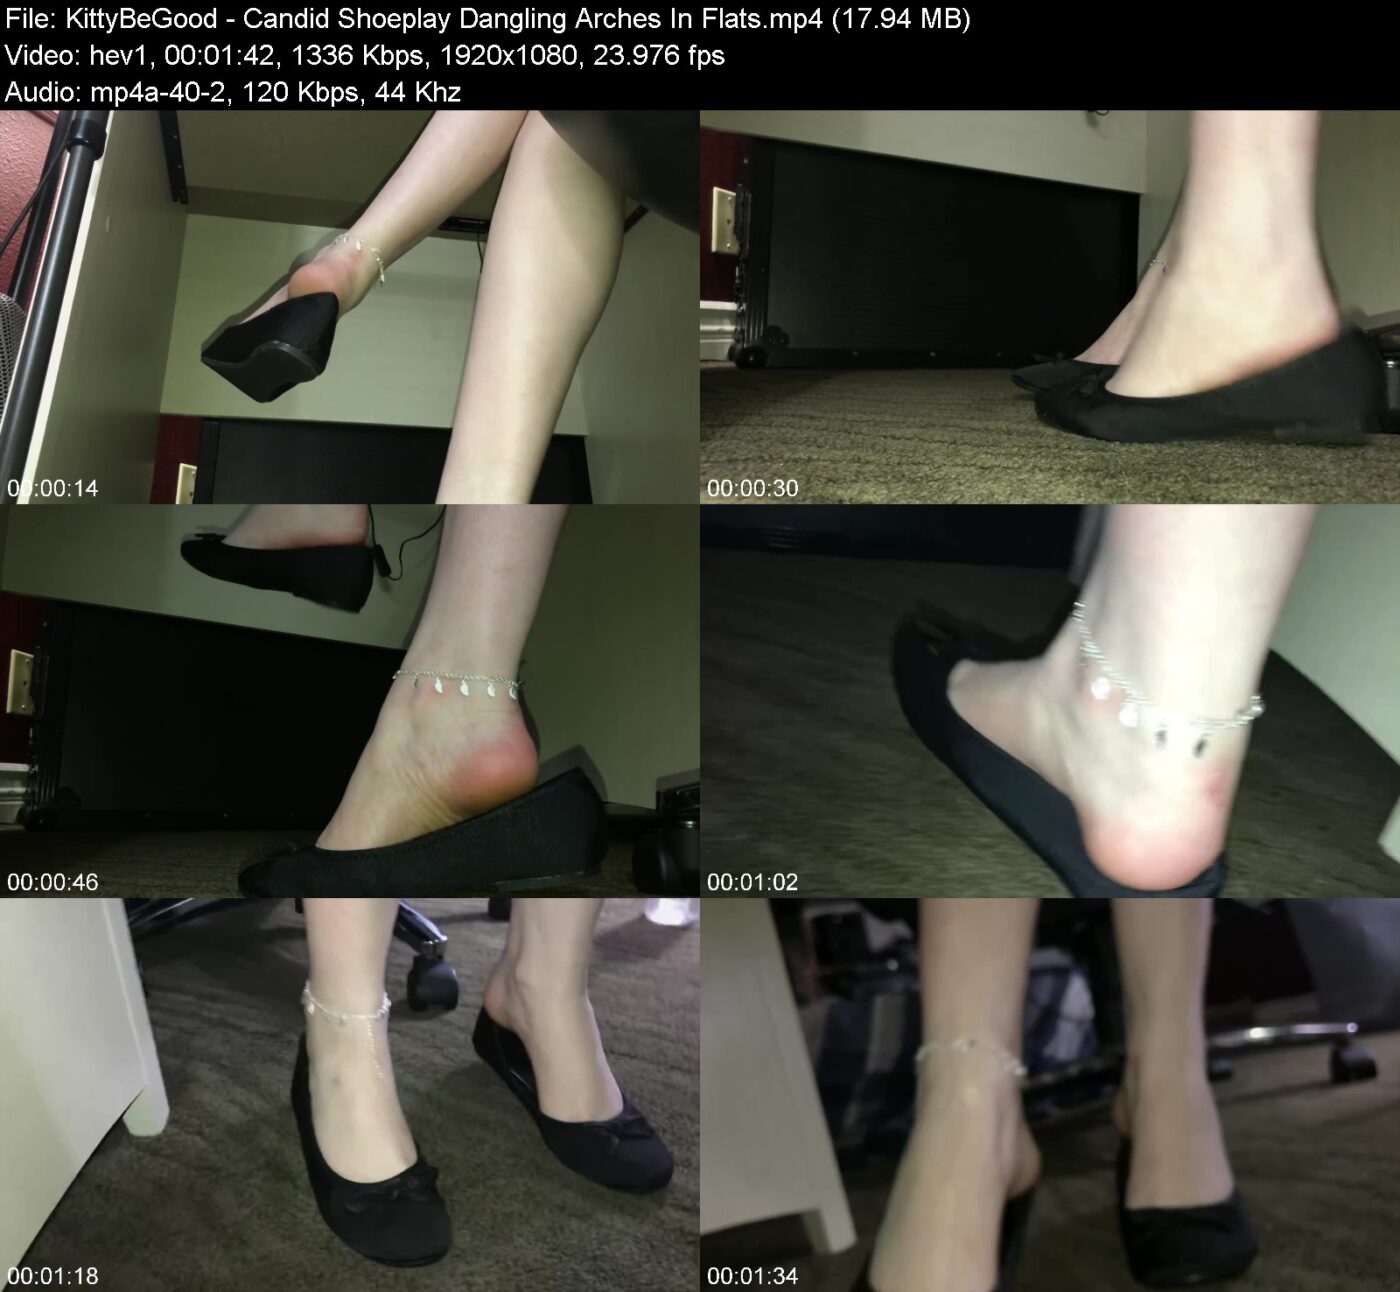 KittyBeGood - Candid Shoeplay Dangling Arches In Flats